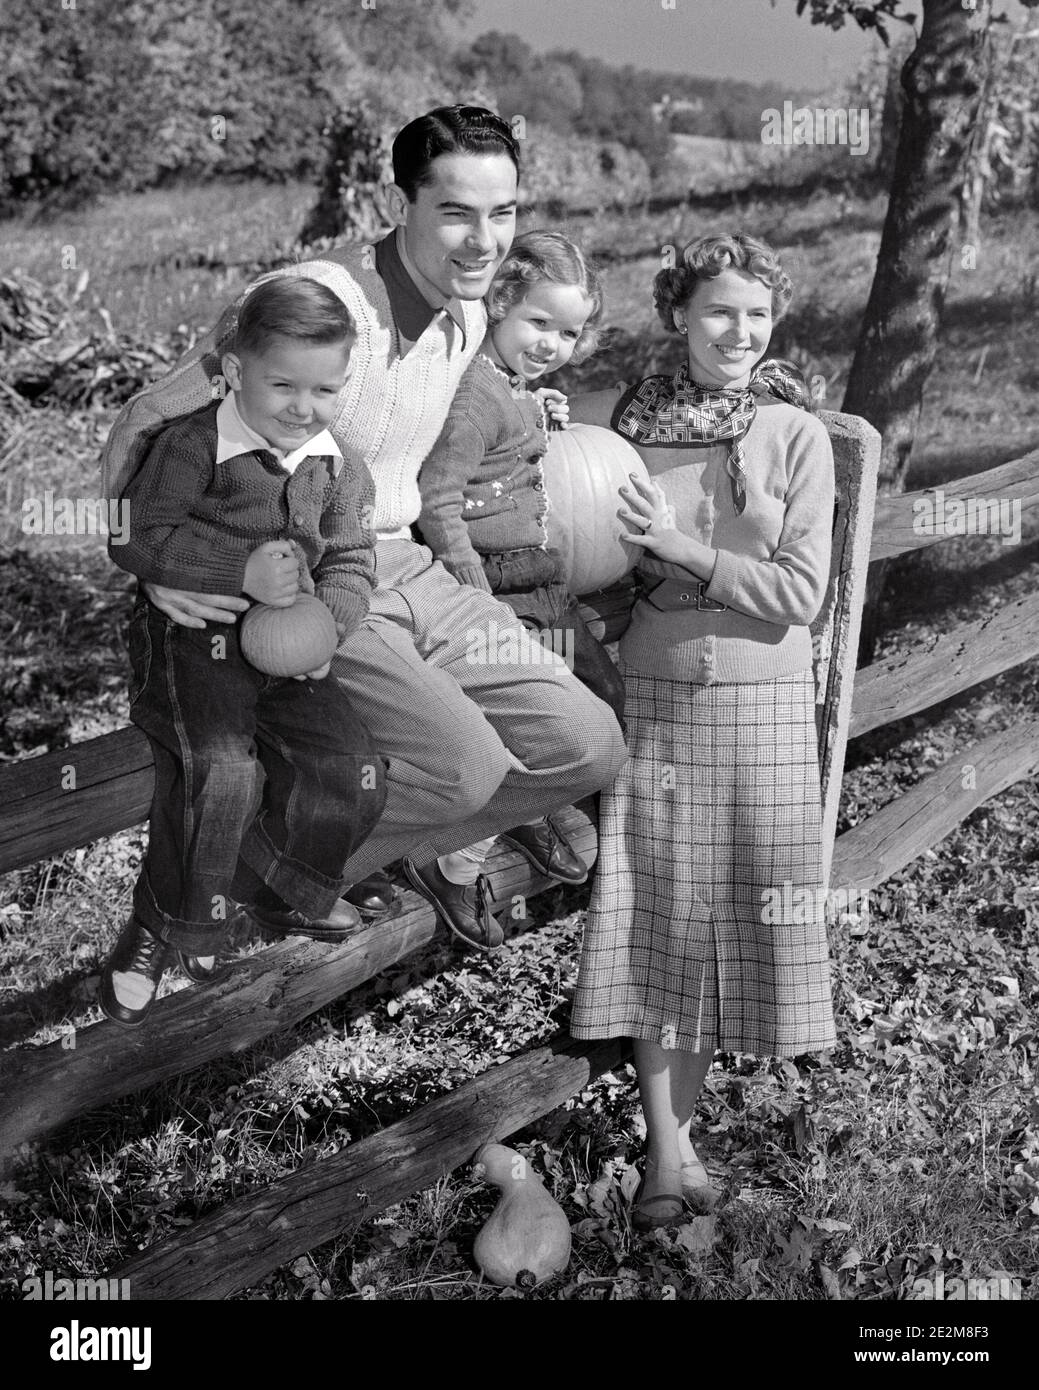 1950s SMILING FAMILY IN AUTUMN HOLDING PUMPKINS FATHER DAUGHTER AND SON SITTING ON WOODEN SPLIT RAIL FENCE MOTHER STANDING - c4912 HAR001 HARS FENCE FOUR AUTUMN MOM WOODEN CLOTHING NOSTALGIC FALL PAIR 4 LEAVES MOTHERS OLD TIME NOSTALGIA BROTHER OLD FASHION SISTER 1 JUVENILE STYLE SONS PLEASED FAMILIES JOY LIFESTYLE SATISFACTION FEMALES MARRIED BROTHERS RURAL SPOUSE HUSBANDS HOME LIFE NATURE COPY SPACE FRIENDSHIP FULL-LENGTH HALF-LENGTH LADIES DAUGHTERS PERSONS MALES SIBLINGS SISTERS FATHERS AGRICULTURE B&W PARTNER HAPPINESS CHEERFUL PUMPKINS STYLES AND DADS EXTERIOR FALL SEASON PRIDE SIBLING Stock Photo